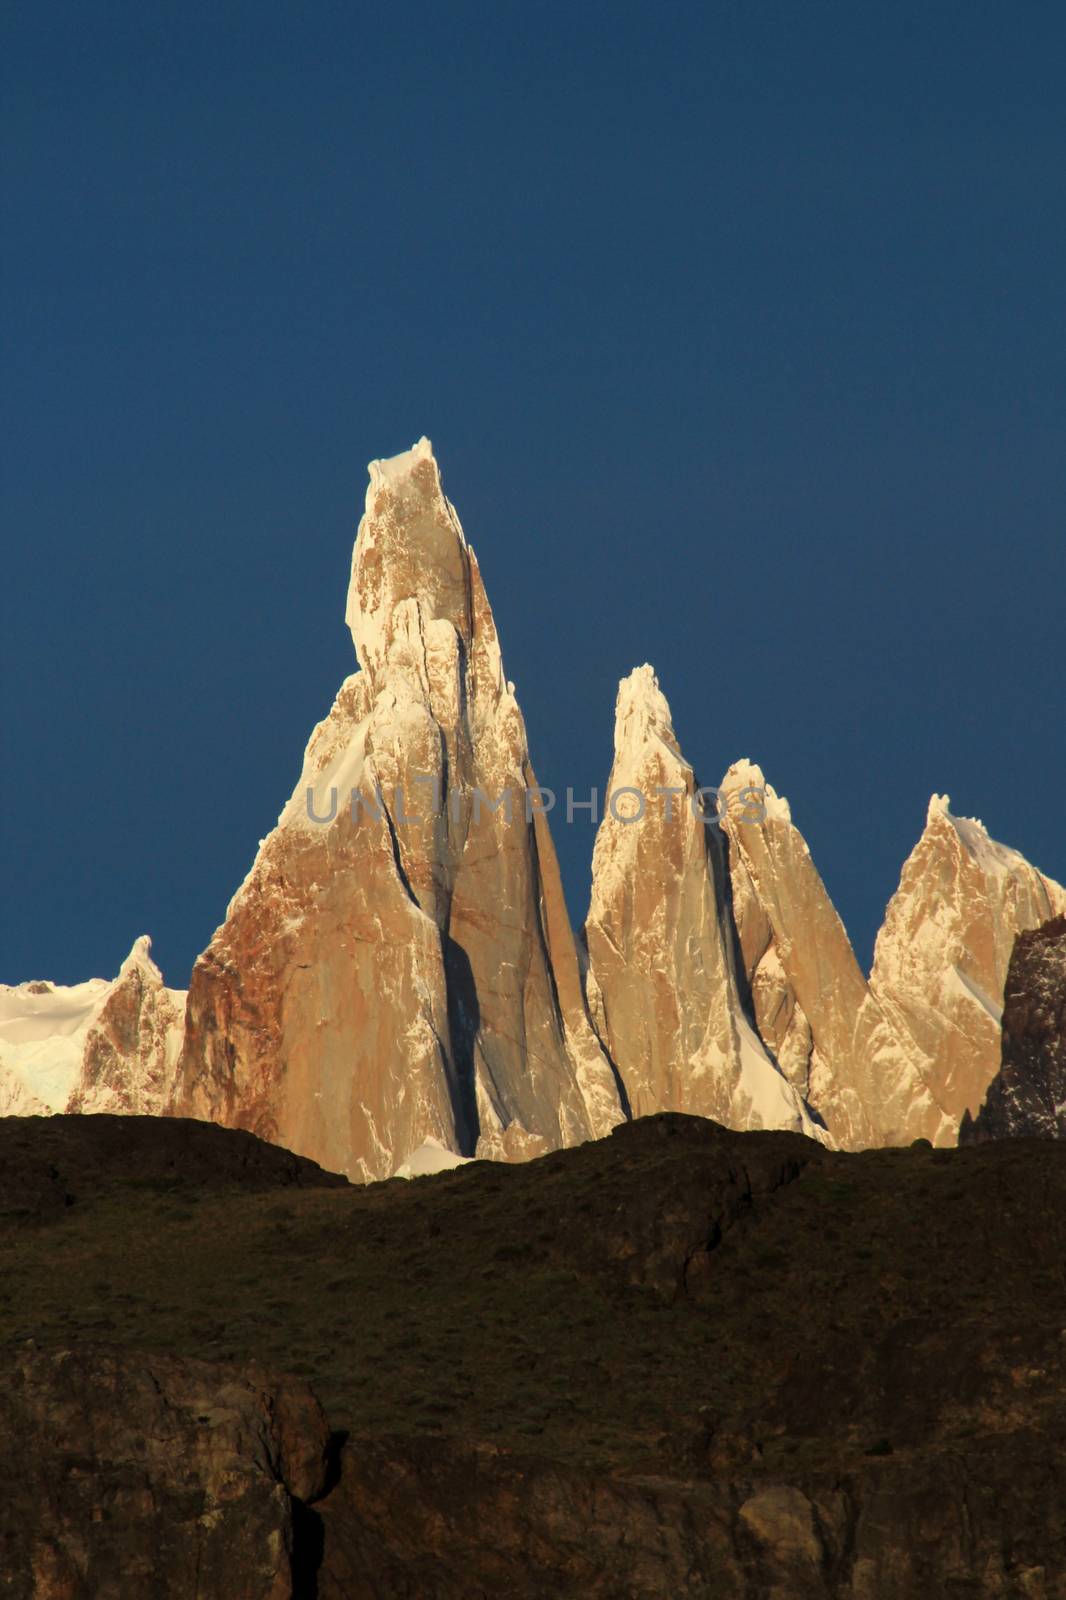 Cerro Torre mountainline at sunrise, Patagonia, Argentina by cicloco